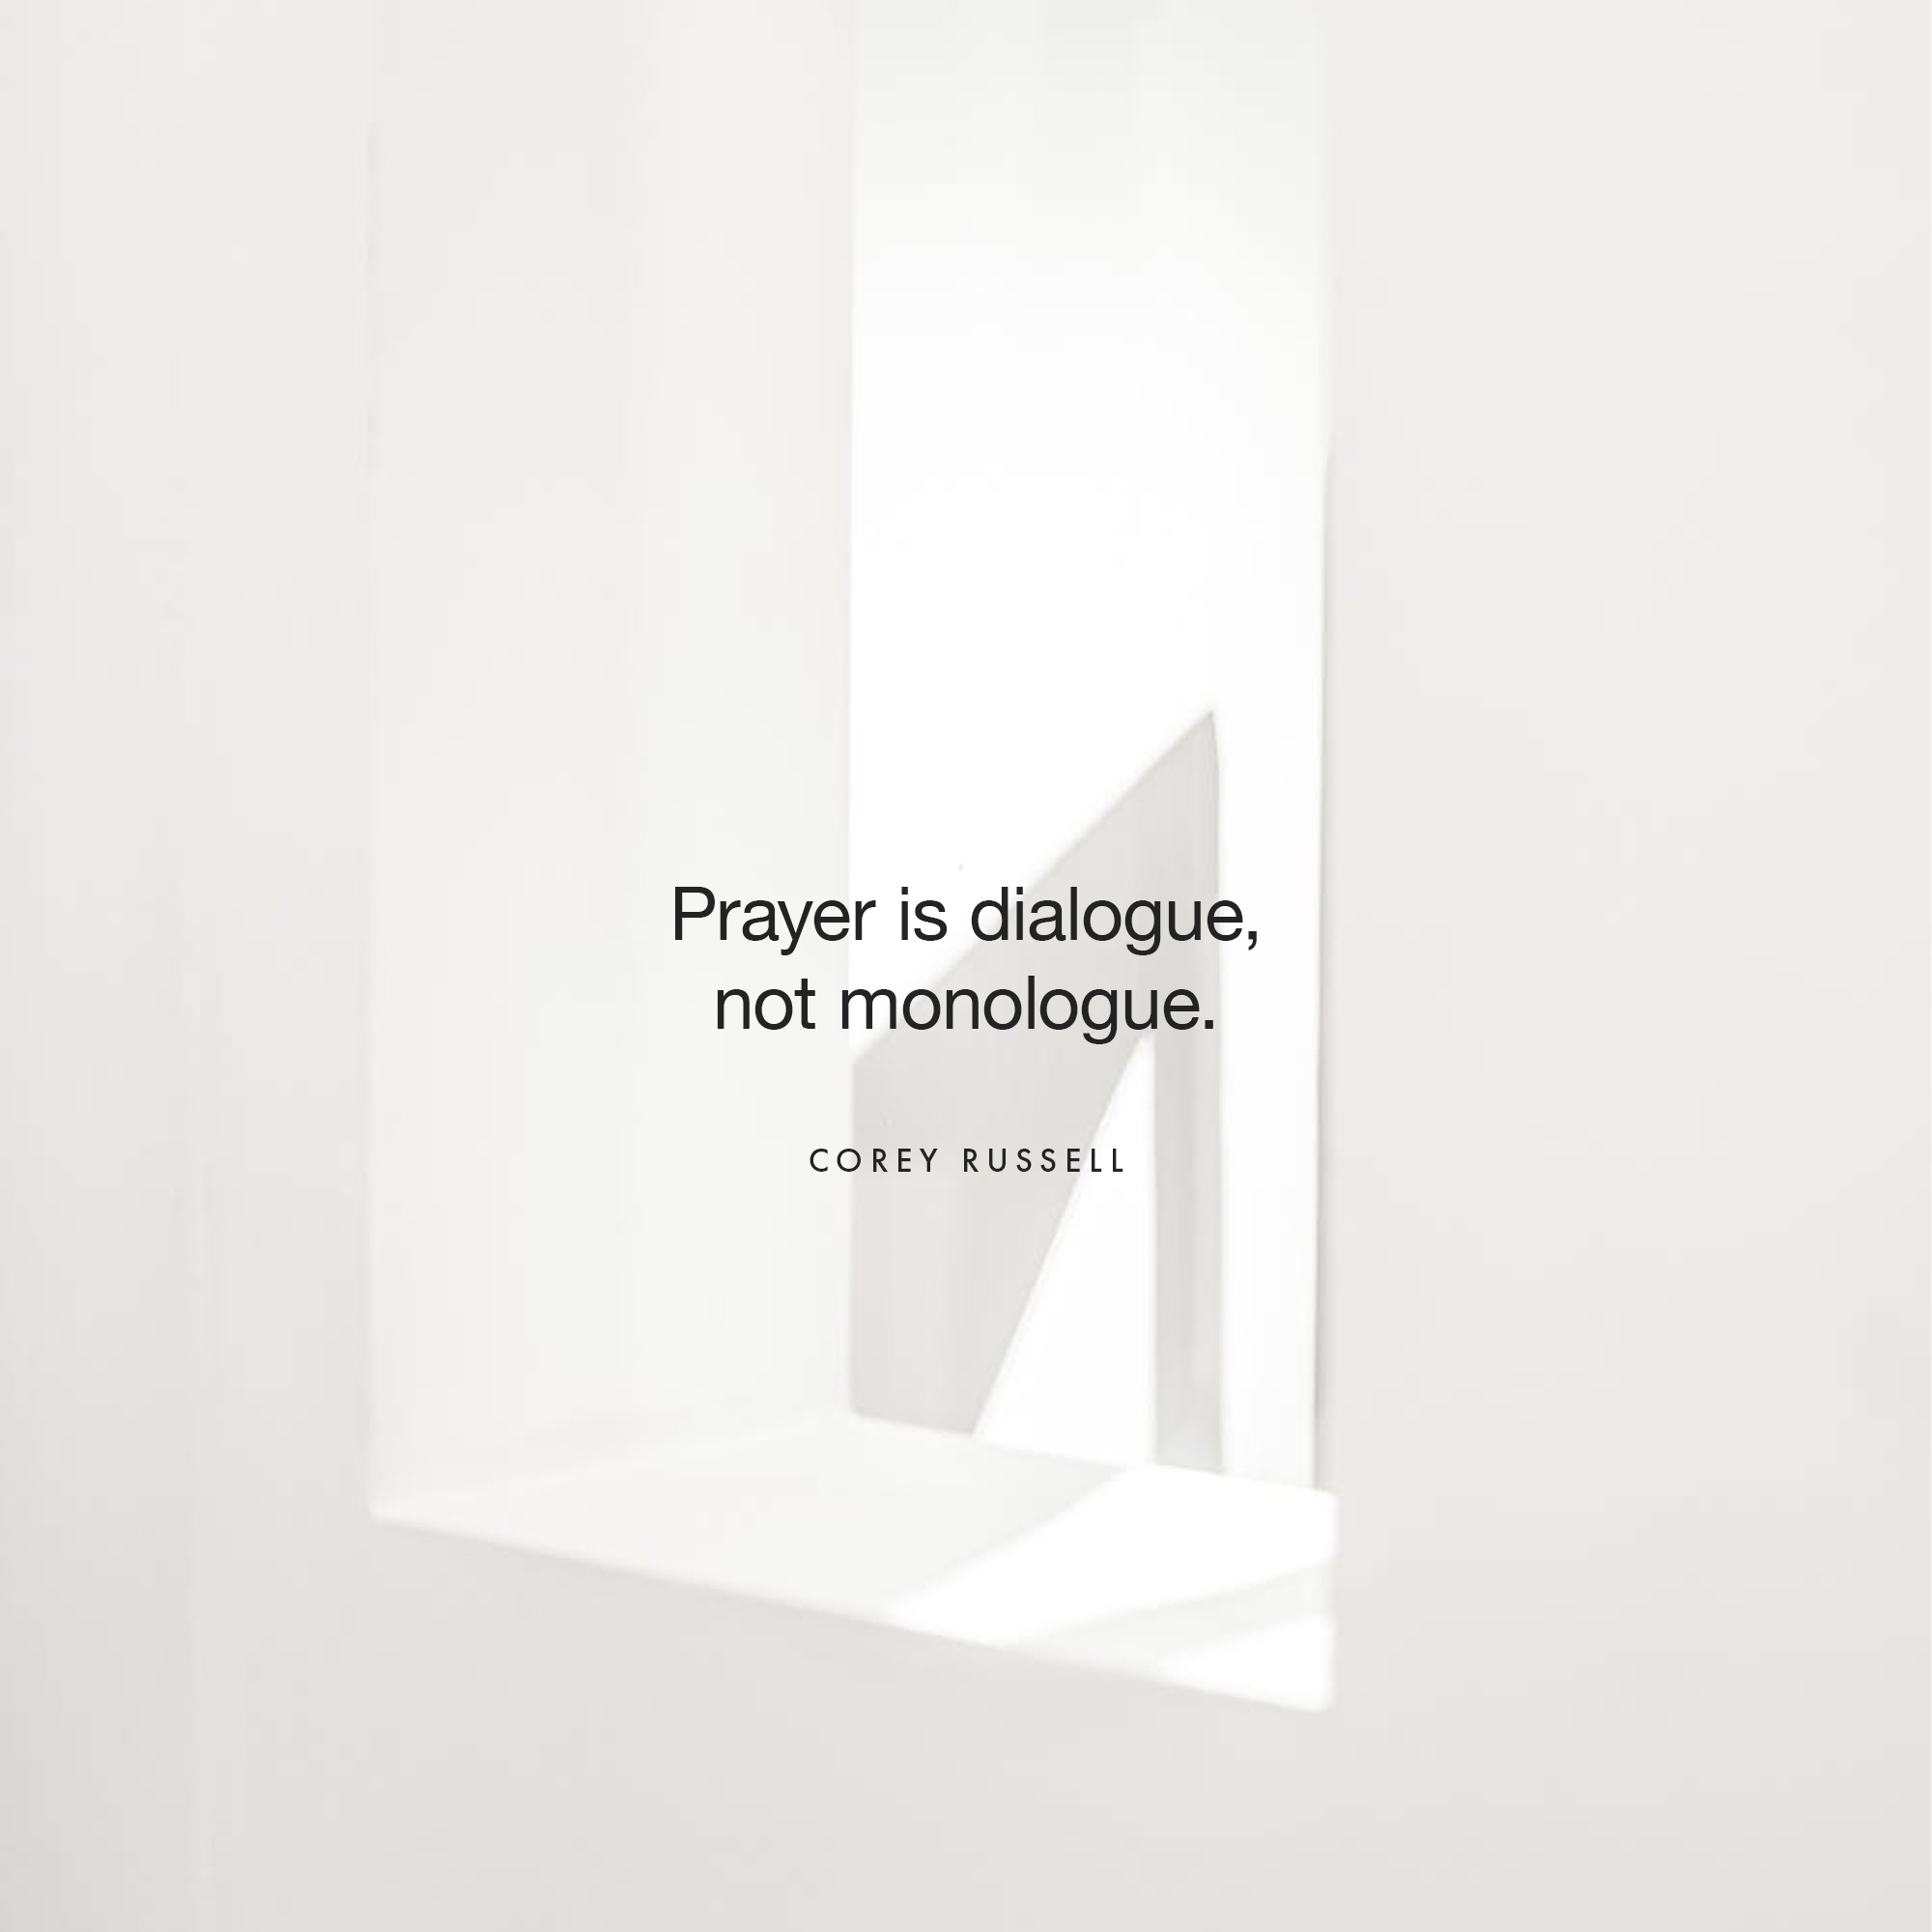 Shareable Quote for “Praying Church”